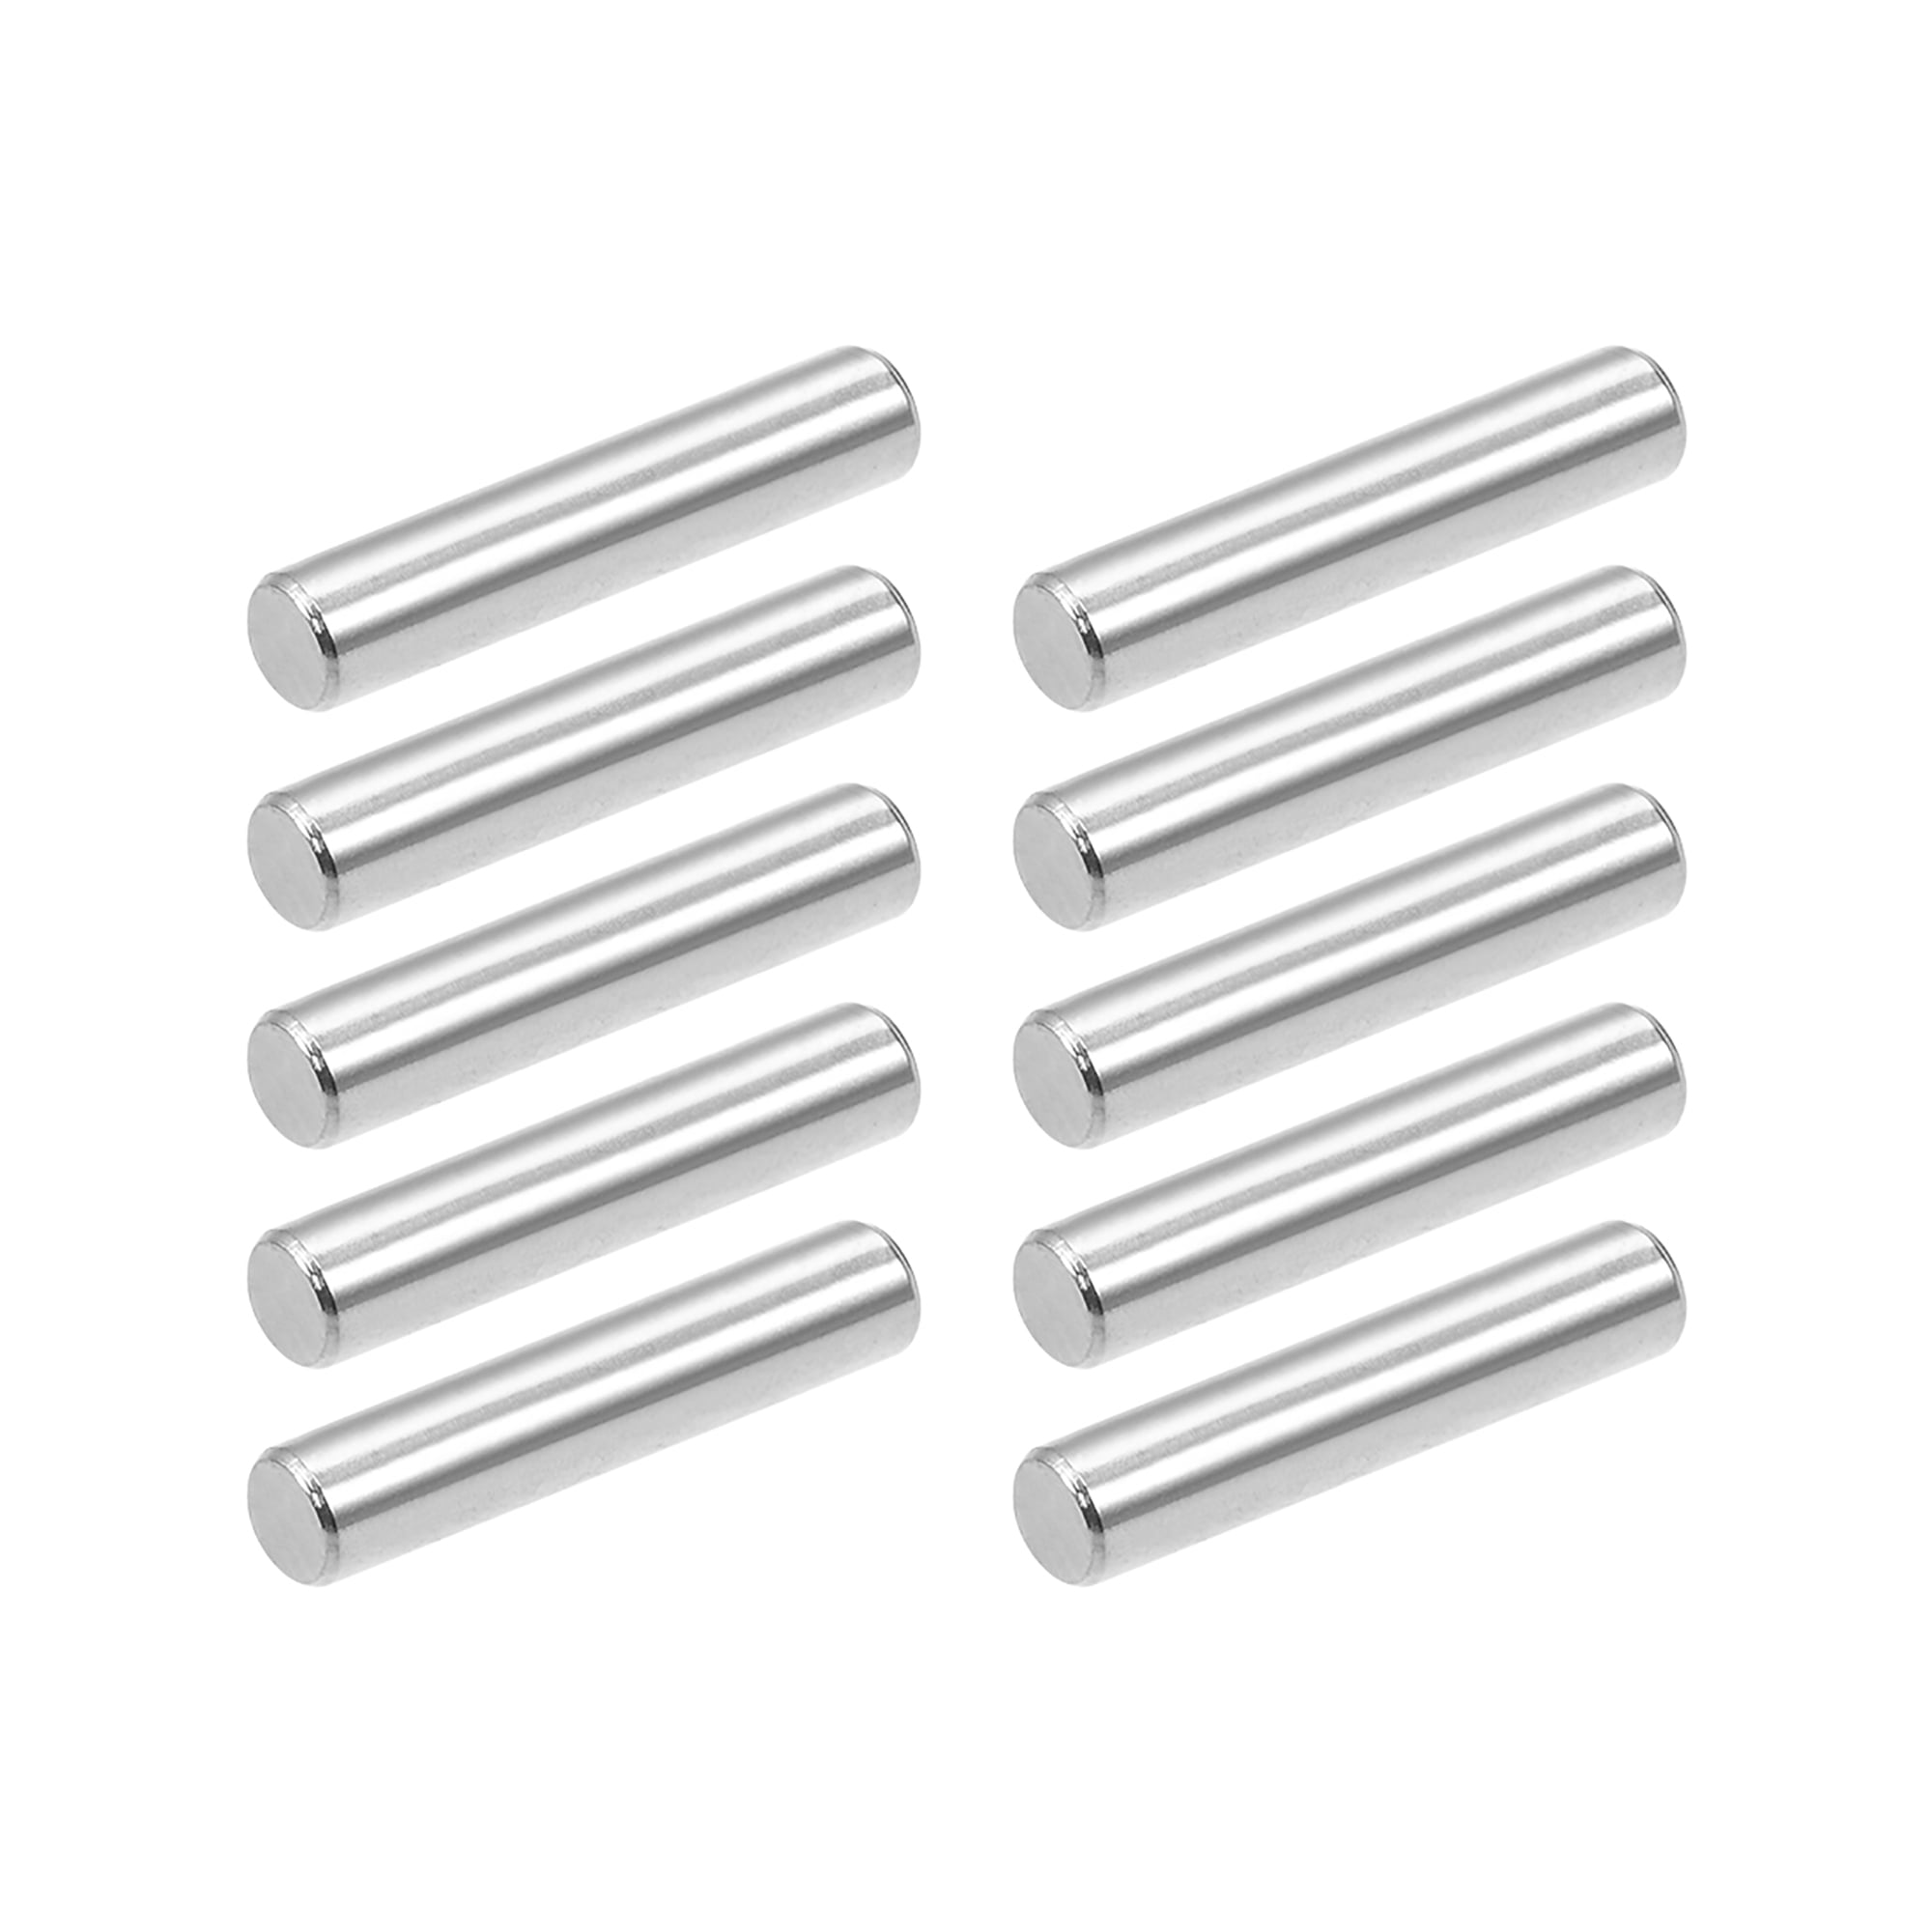 10Pcs 5mmx25mm Dowel Pin 304 Stainless Steel Wood Bunk Bed Dowel Pins ...